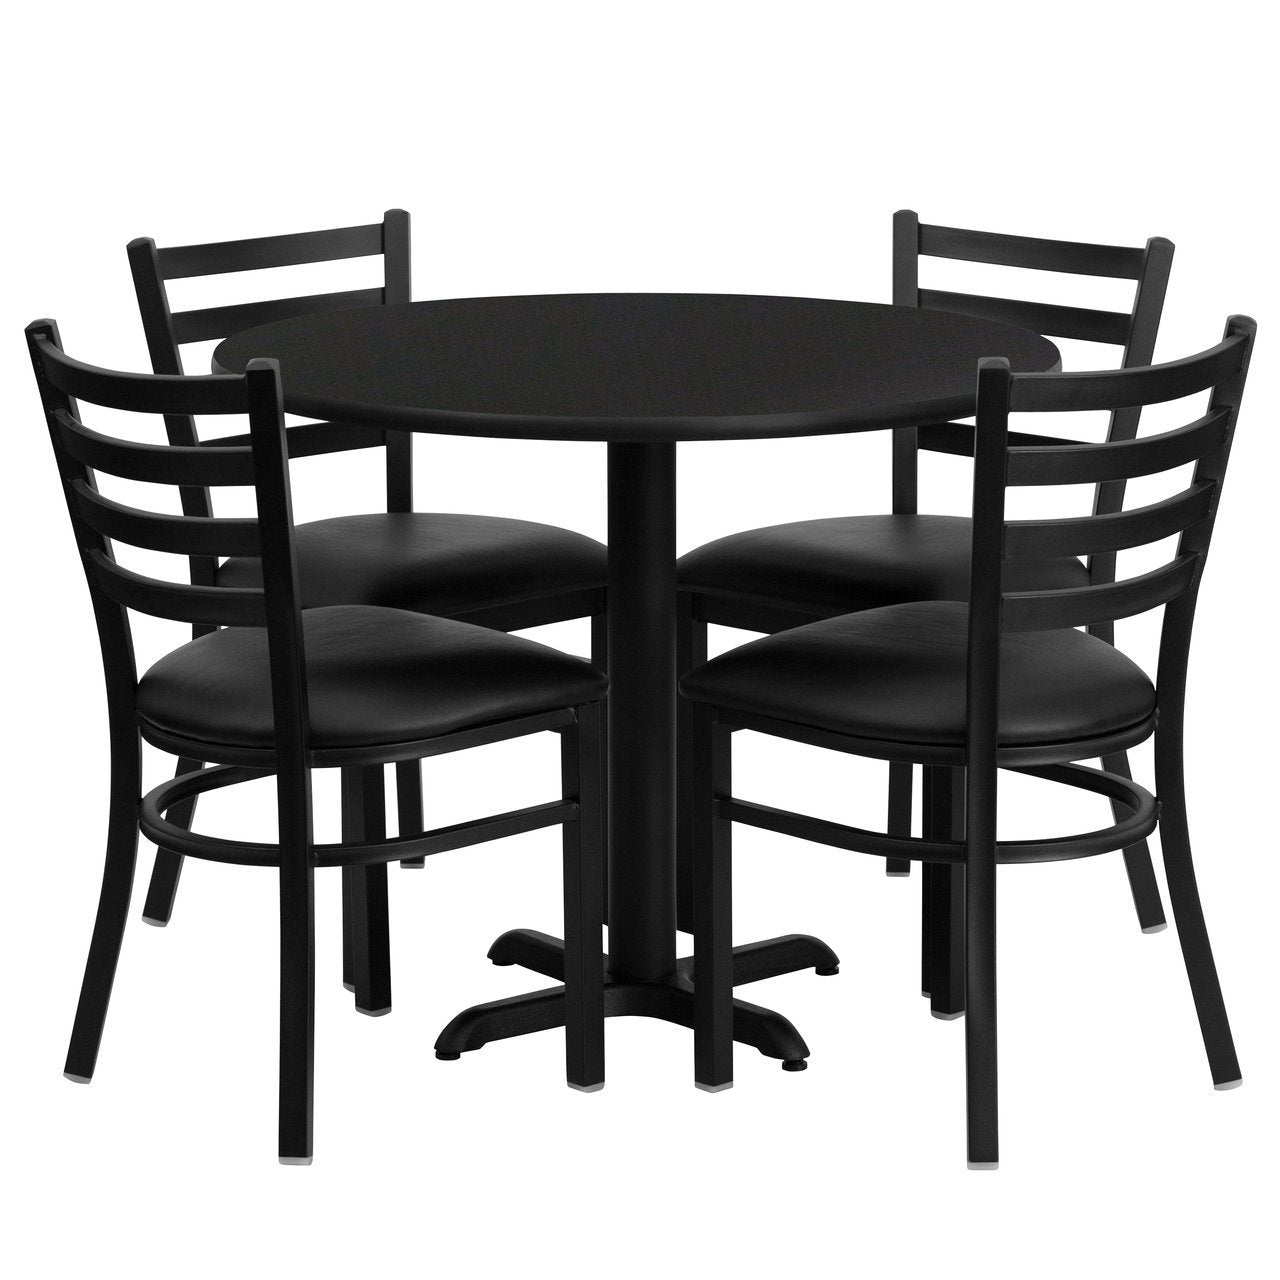 STANDARD HEIGHT TABLE SETS